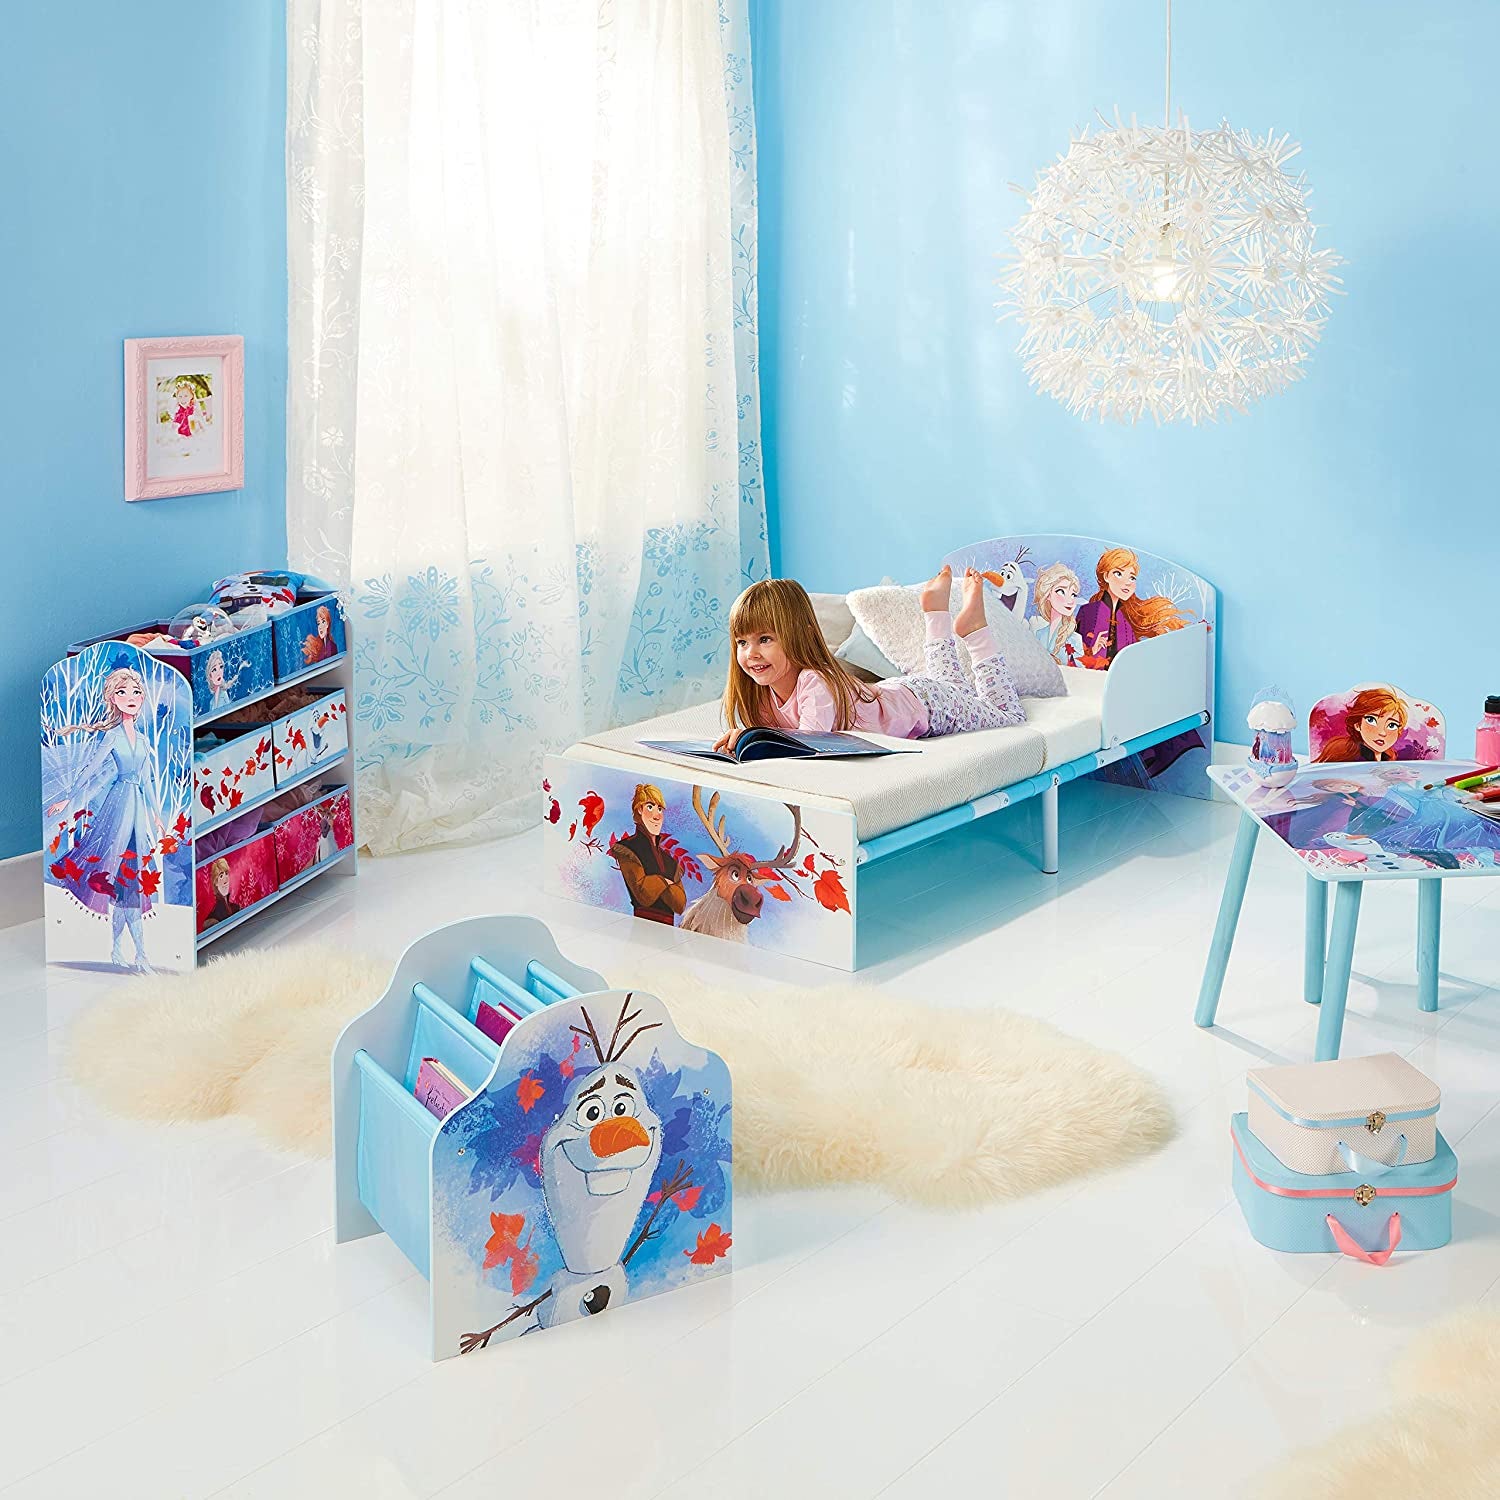 Frozen Kids Toddler Bed by Hellohome, Single